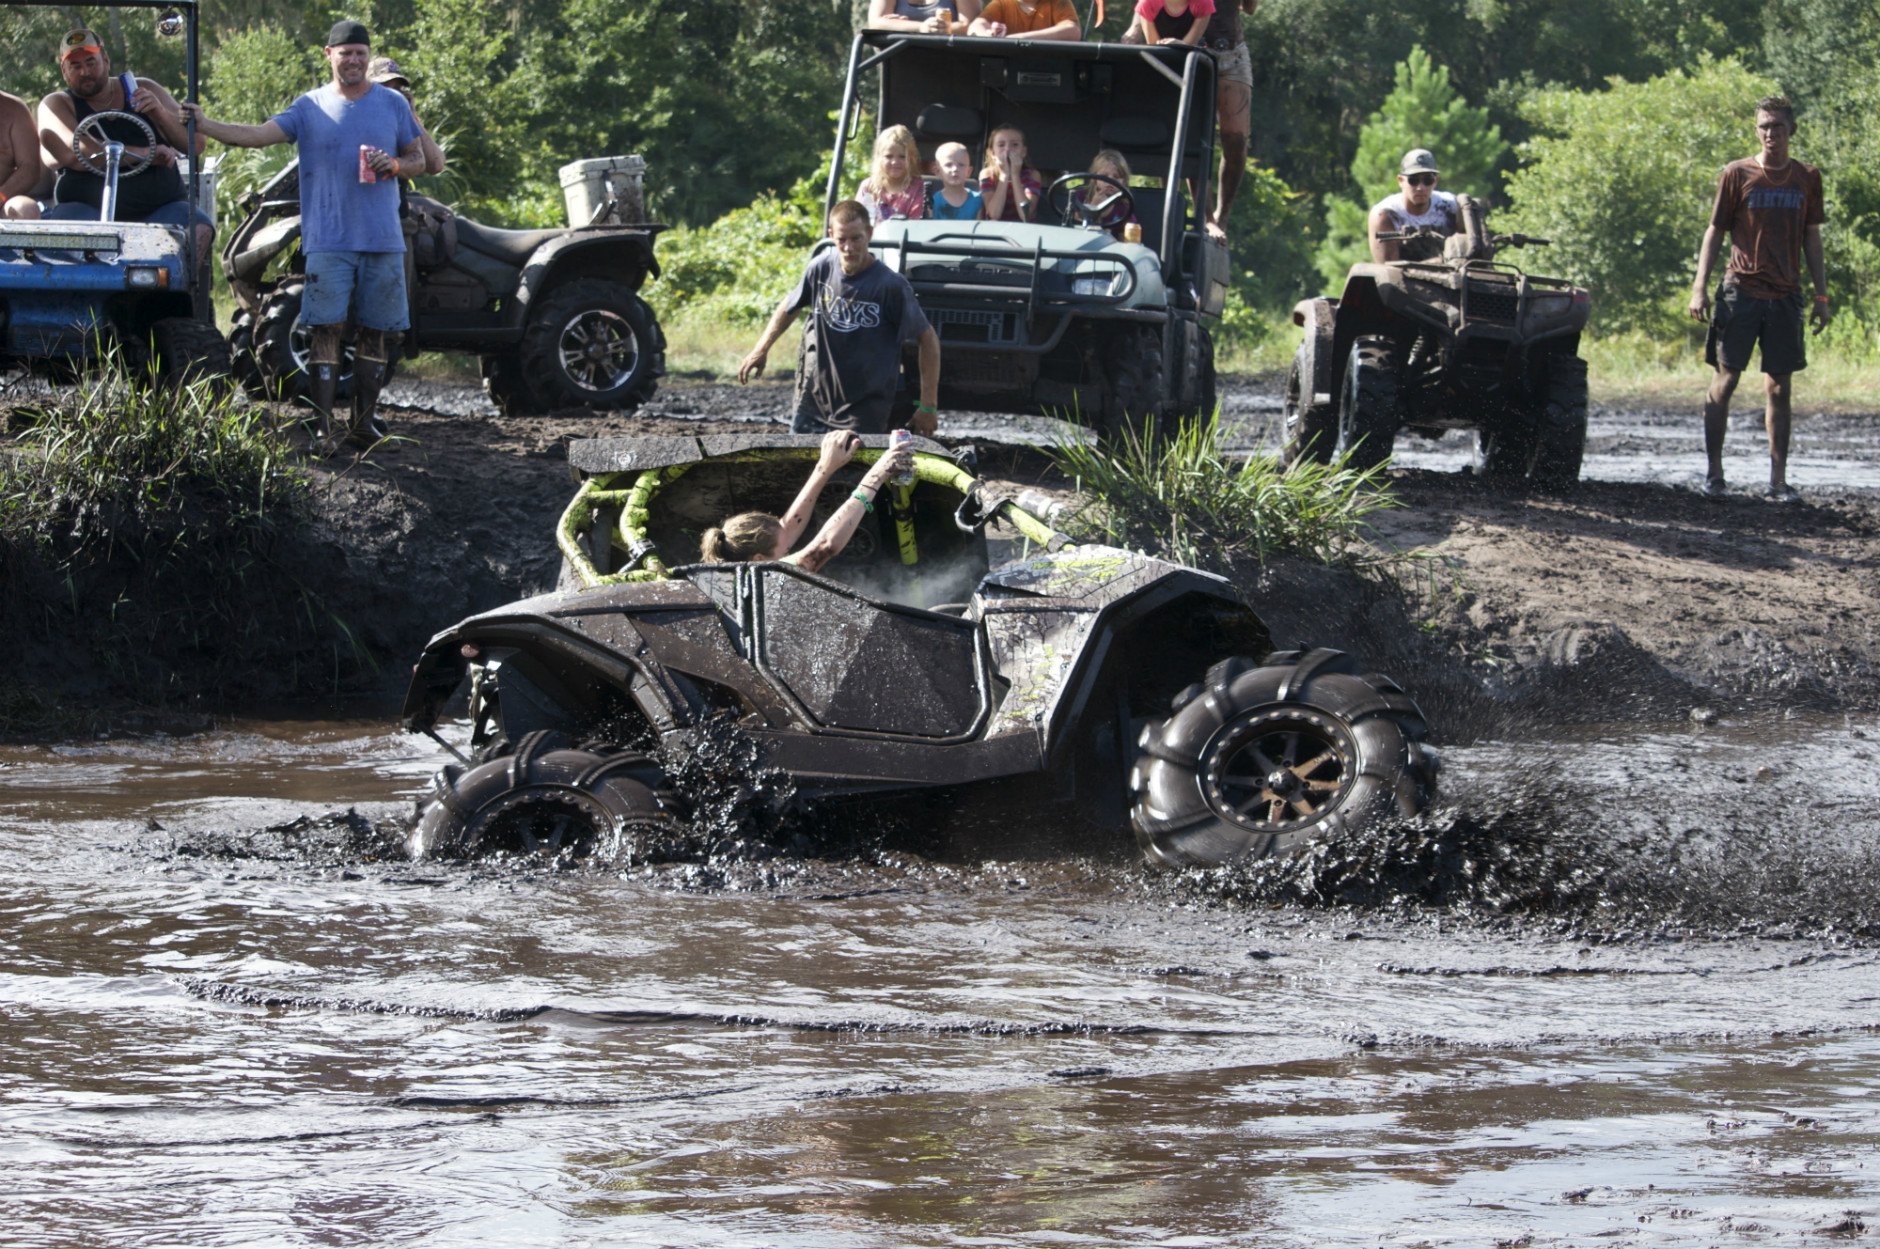 Why Do People Go Mudding?